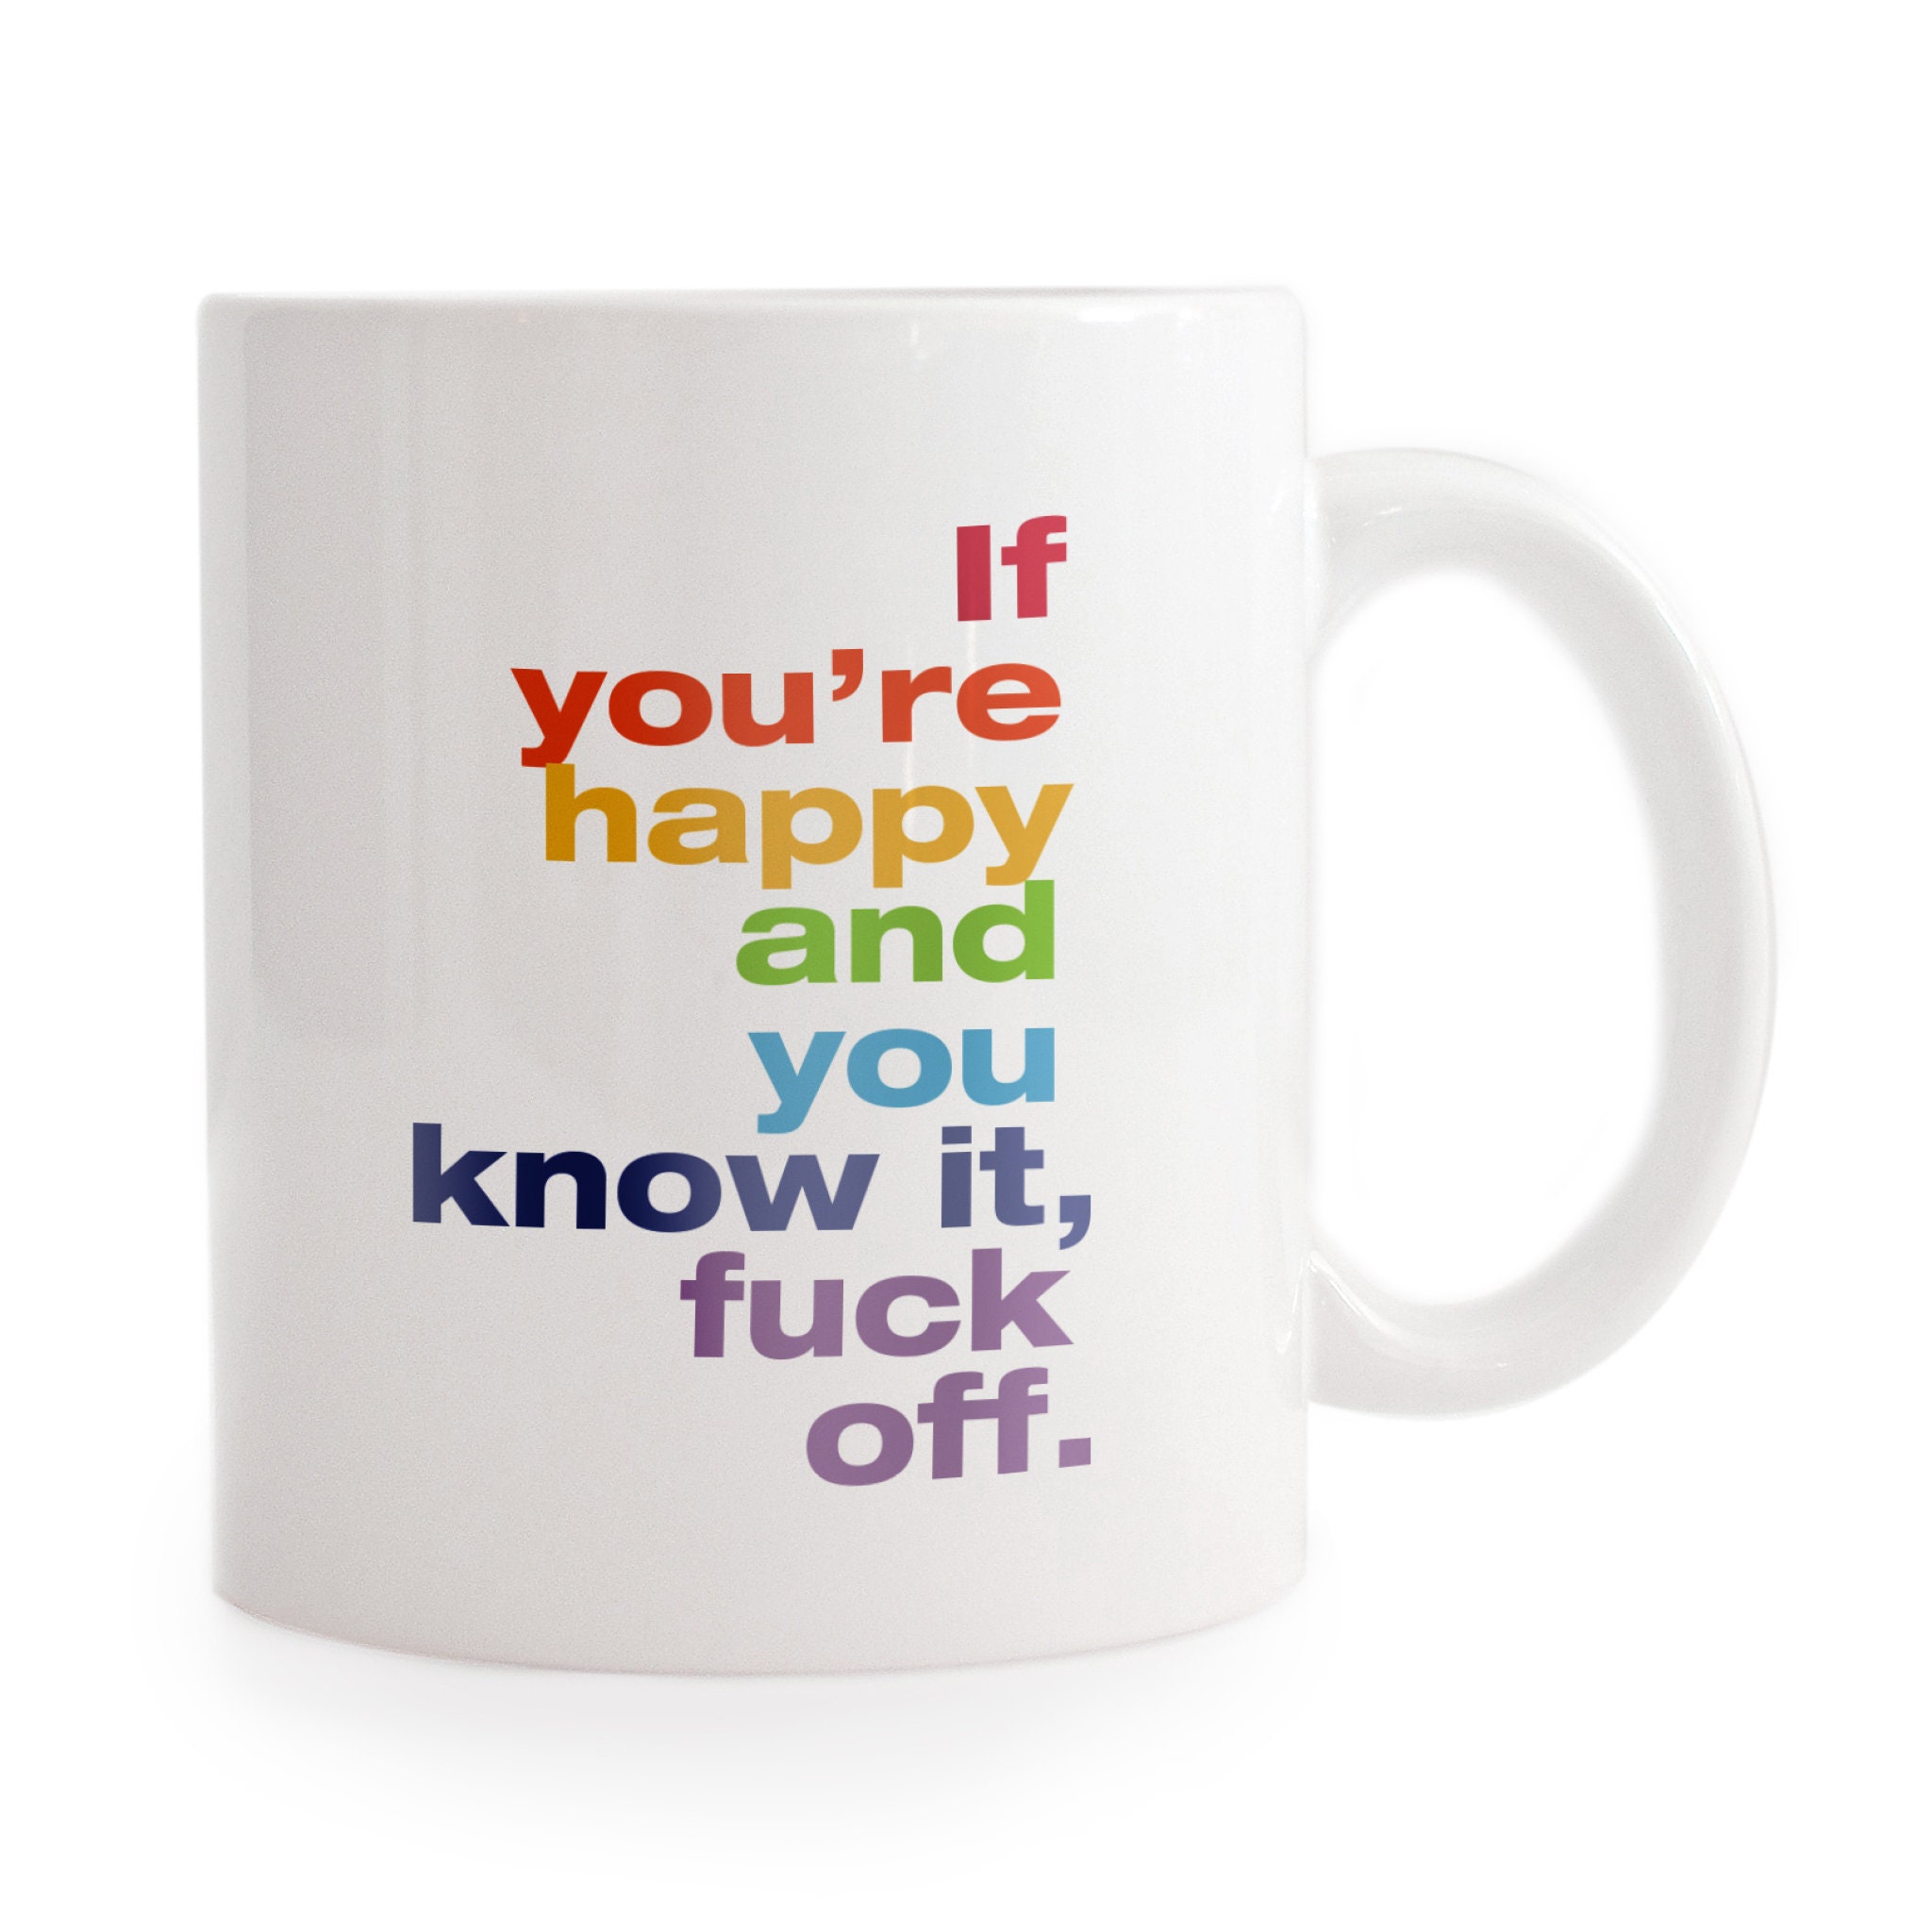 If Youre Happy and You Know It Fuck off Mug Funny Gift